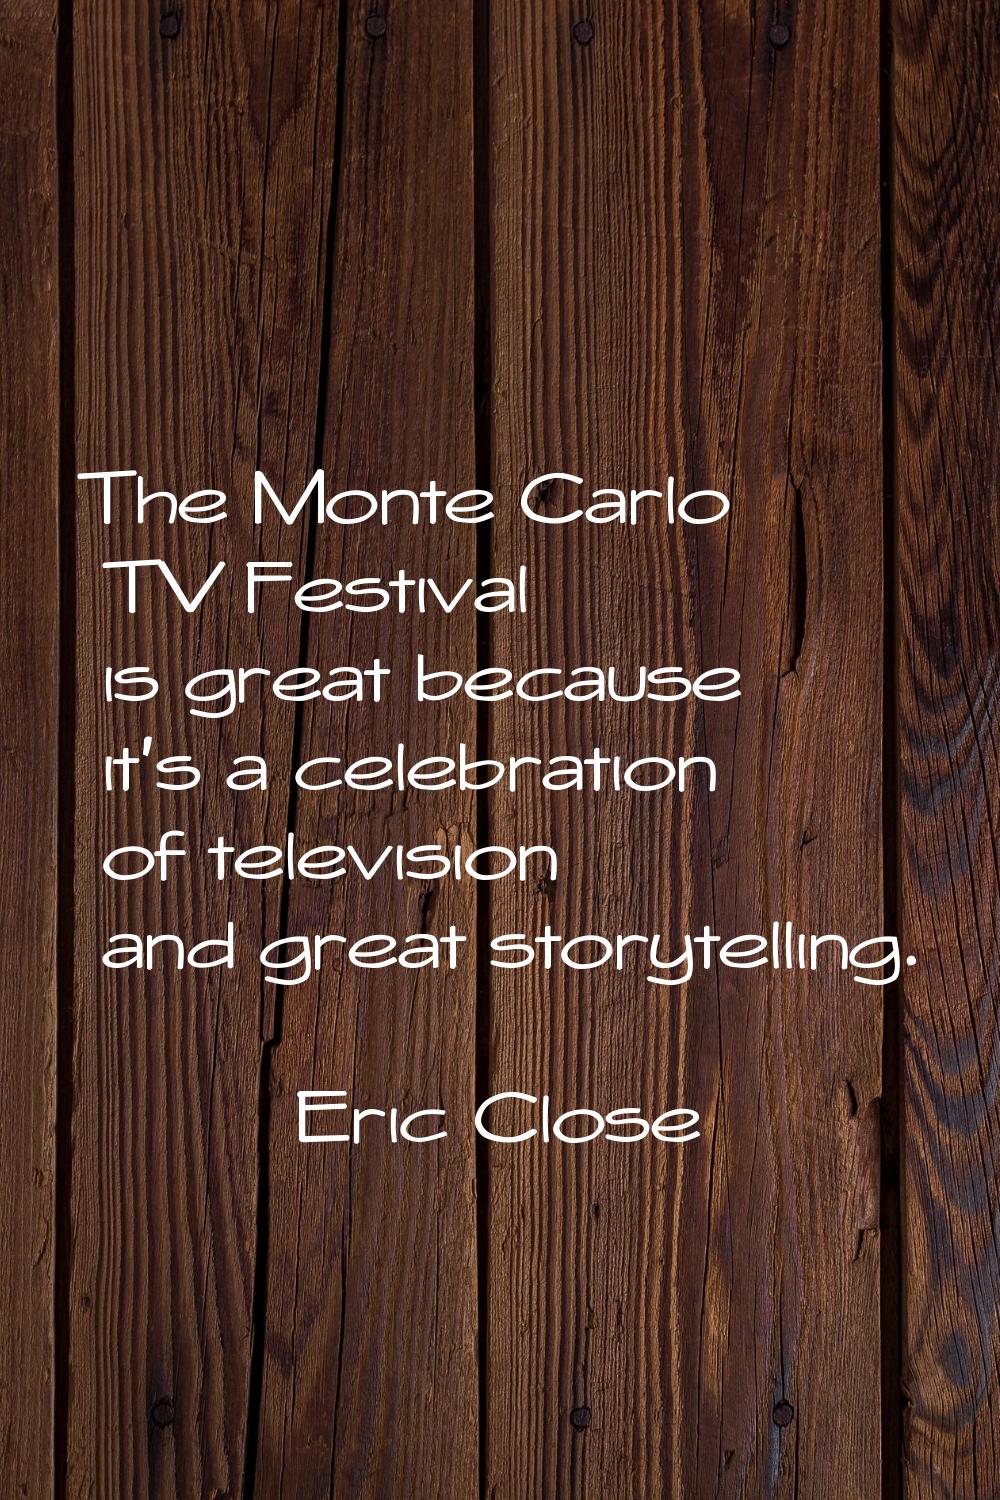 The Monte Carlo TV Festival is great because it's a celebration of television and great storytellin